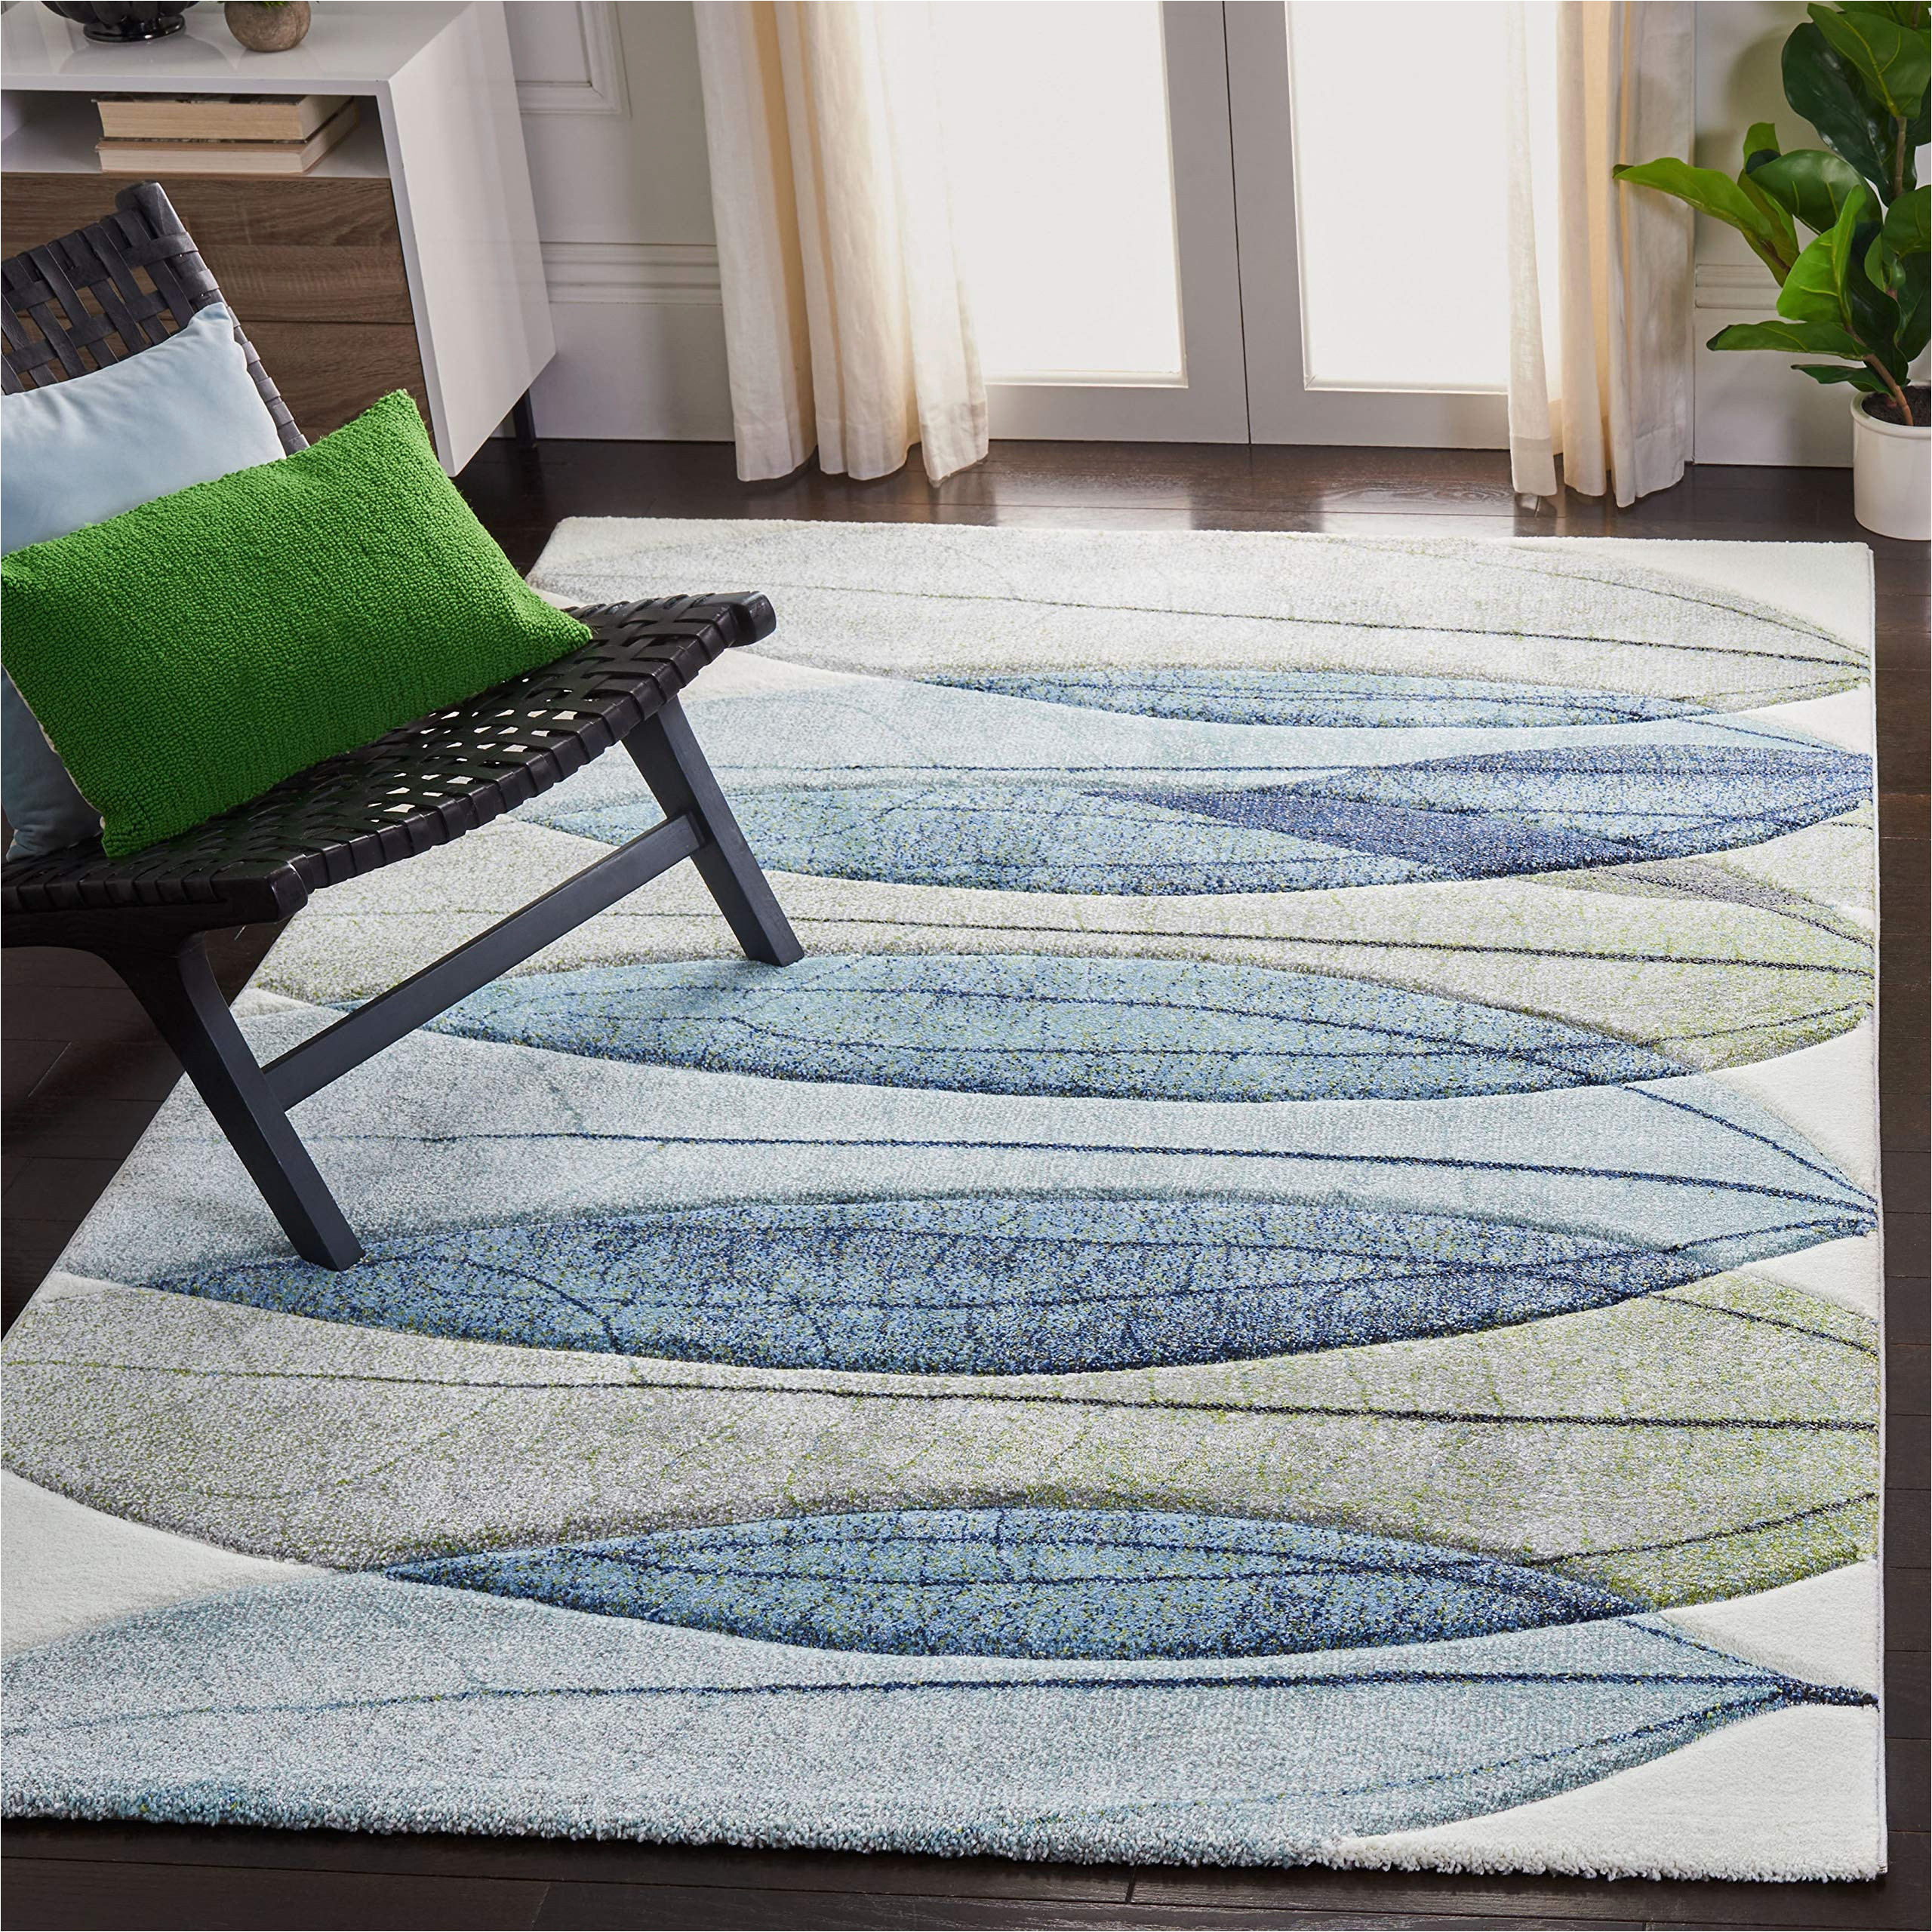 Encore Hand Carved area Rugs Stretto Multi Safavieh Hollywood Collection 8′ X 10′ Ivory/blue Hlw703a Mid-century Modern Non-shedding Living Room Bedroom Dining Home Office area Rug